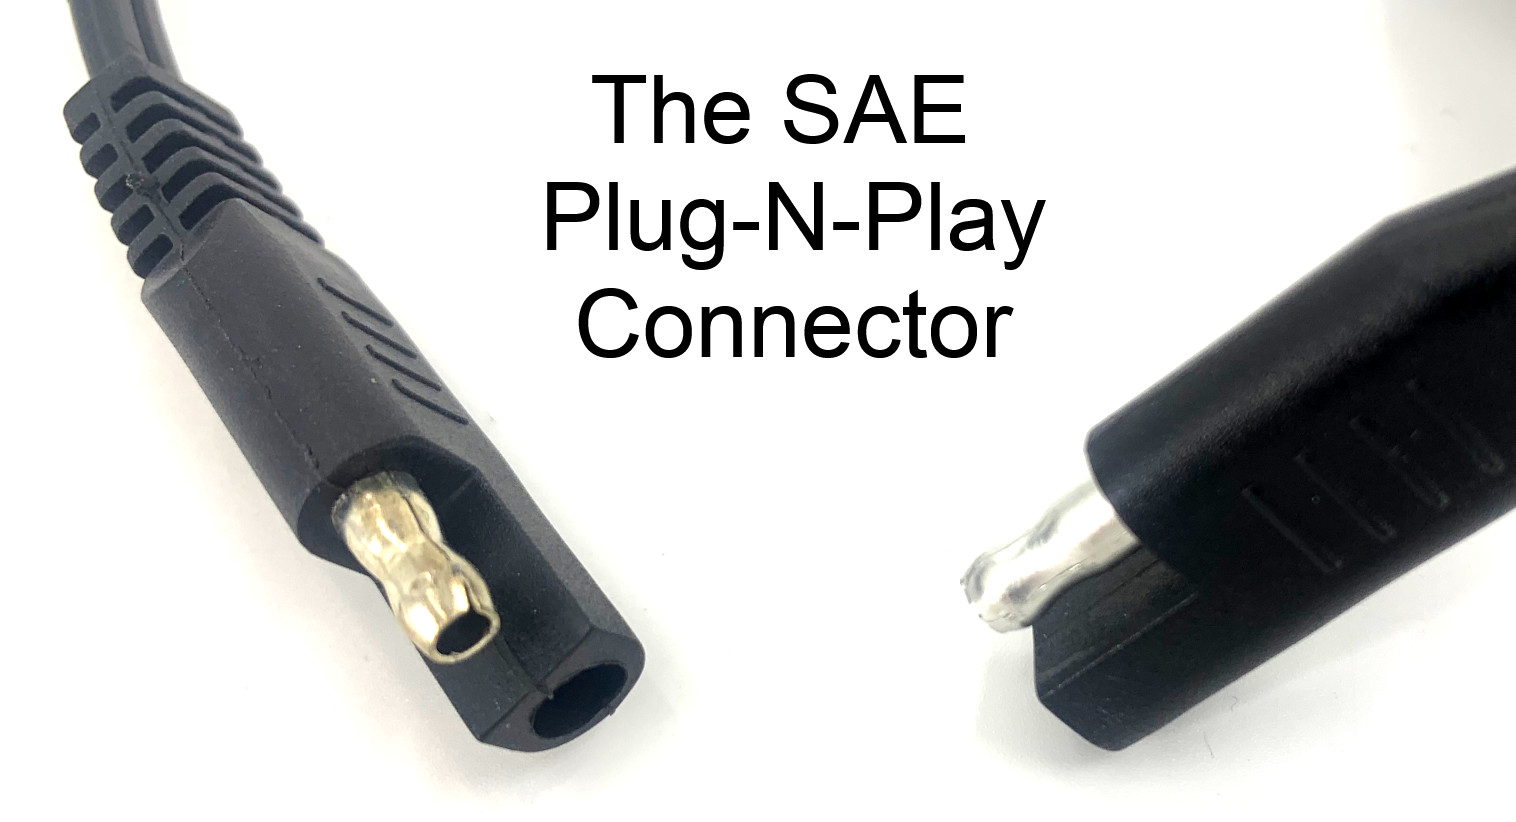 Close up of SAE Plug-N-Play Connector